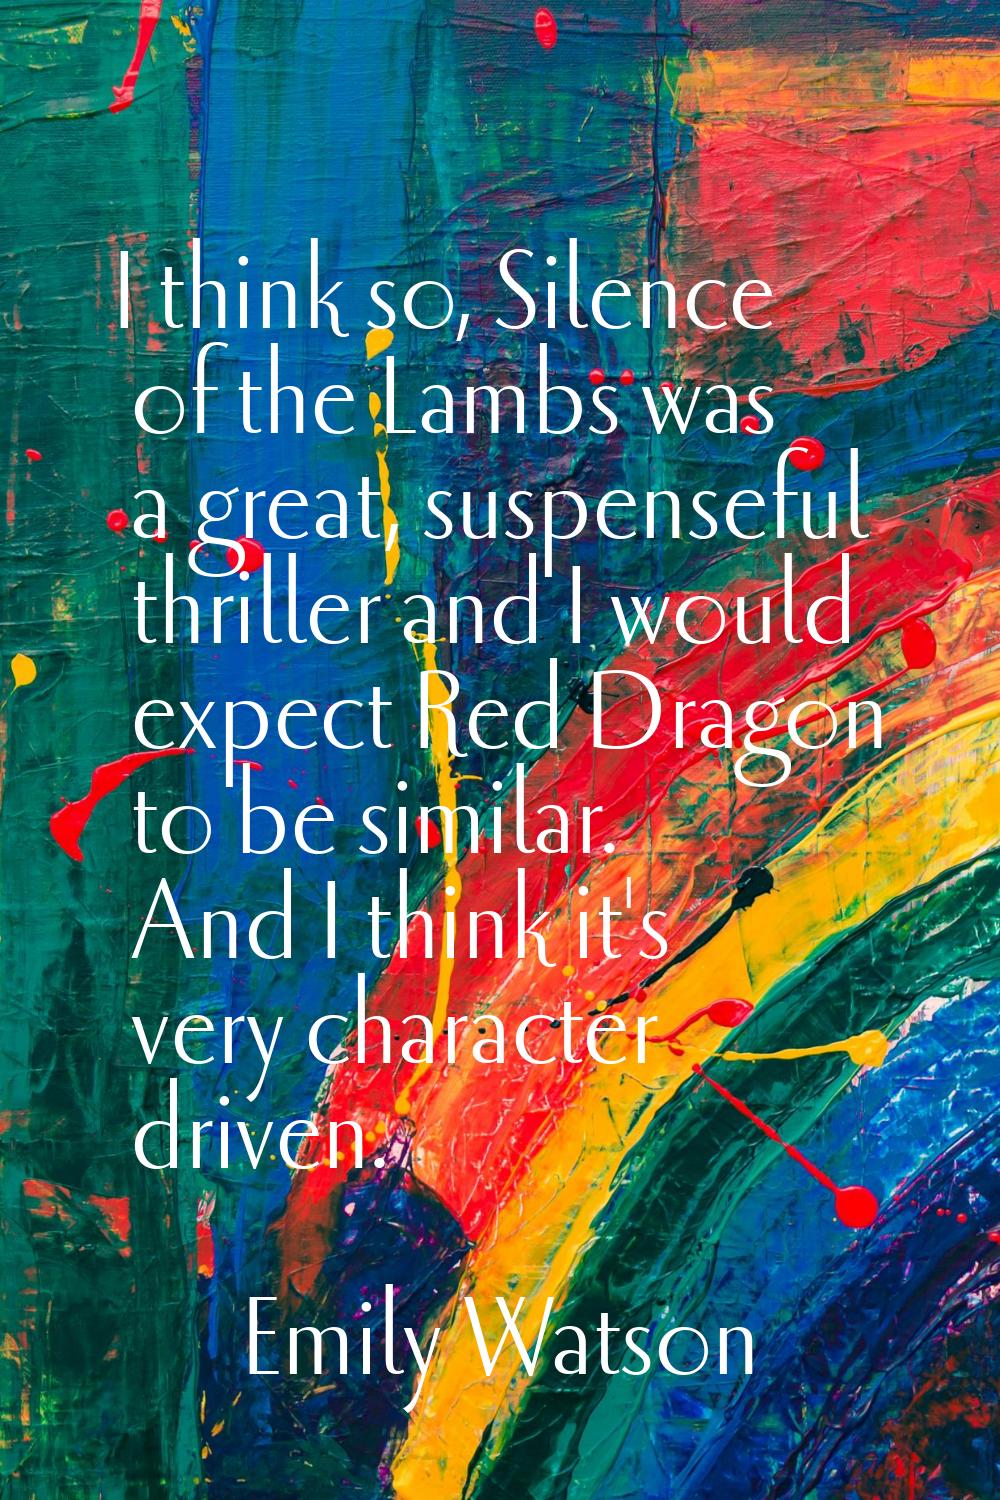 I think so, Silence of the Lambs was a great, suspenseful thriller and I would expect Red Dragon to